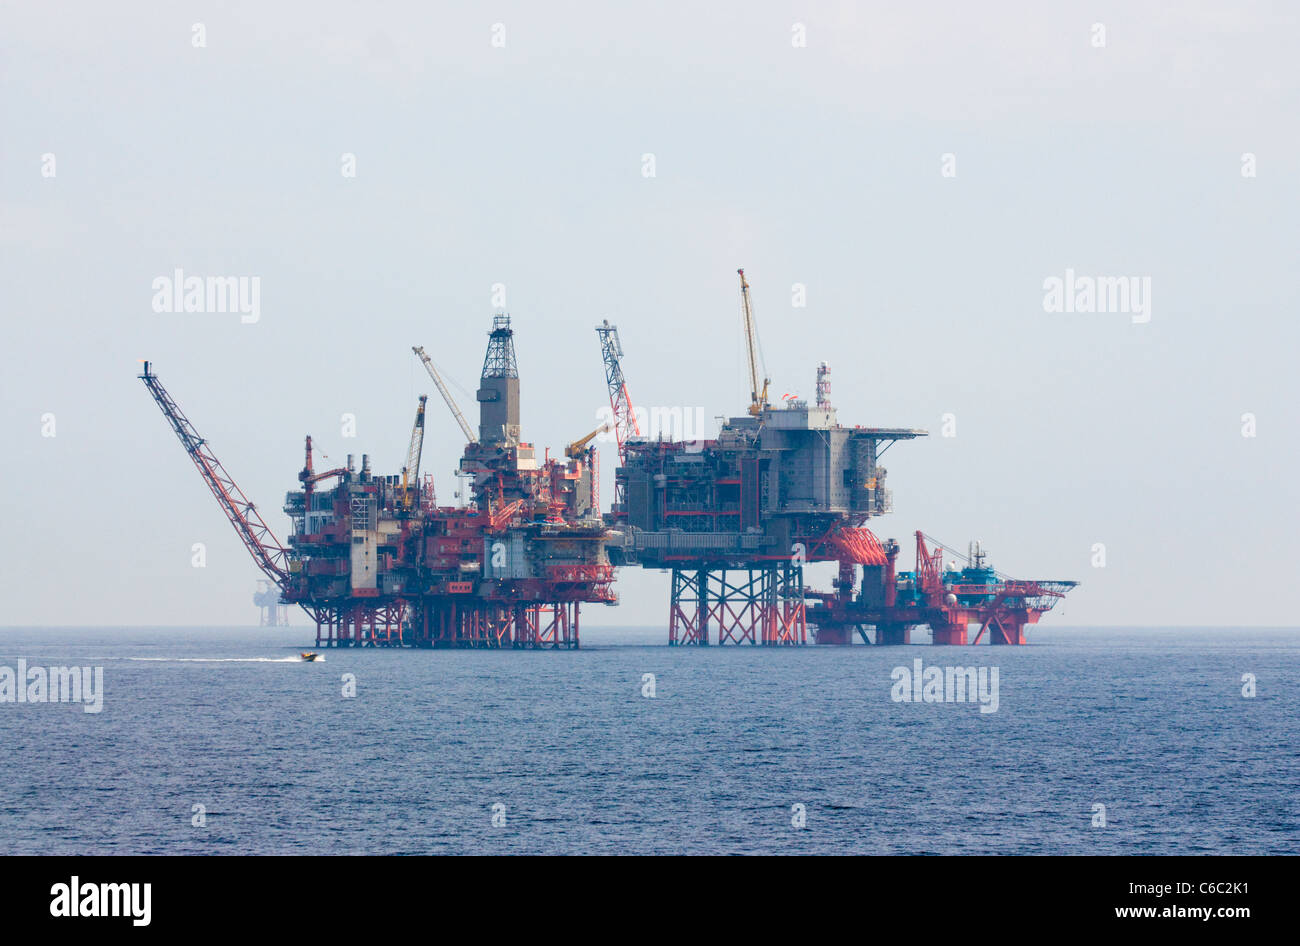 Oil driling rig Valhall Oil field Norwegian part of the North Sea Stock Photo